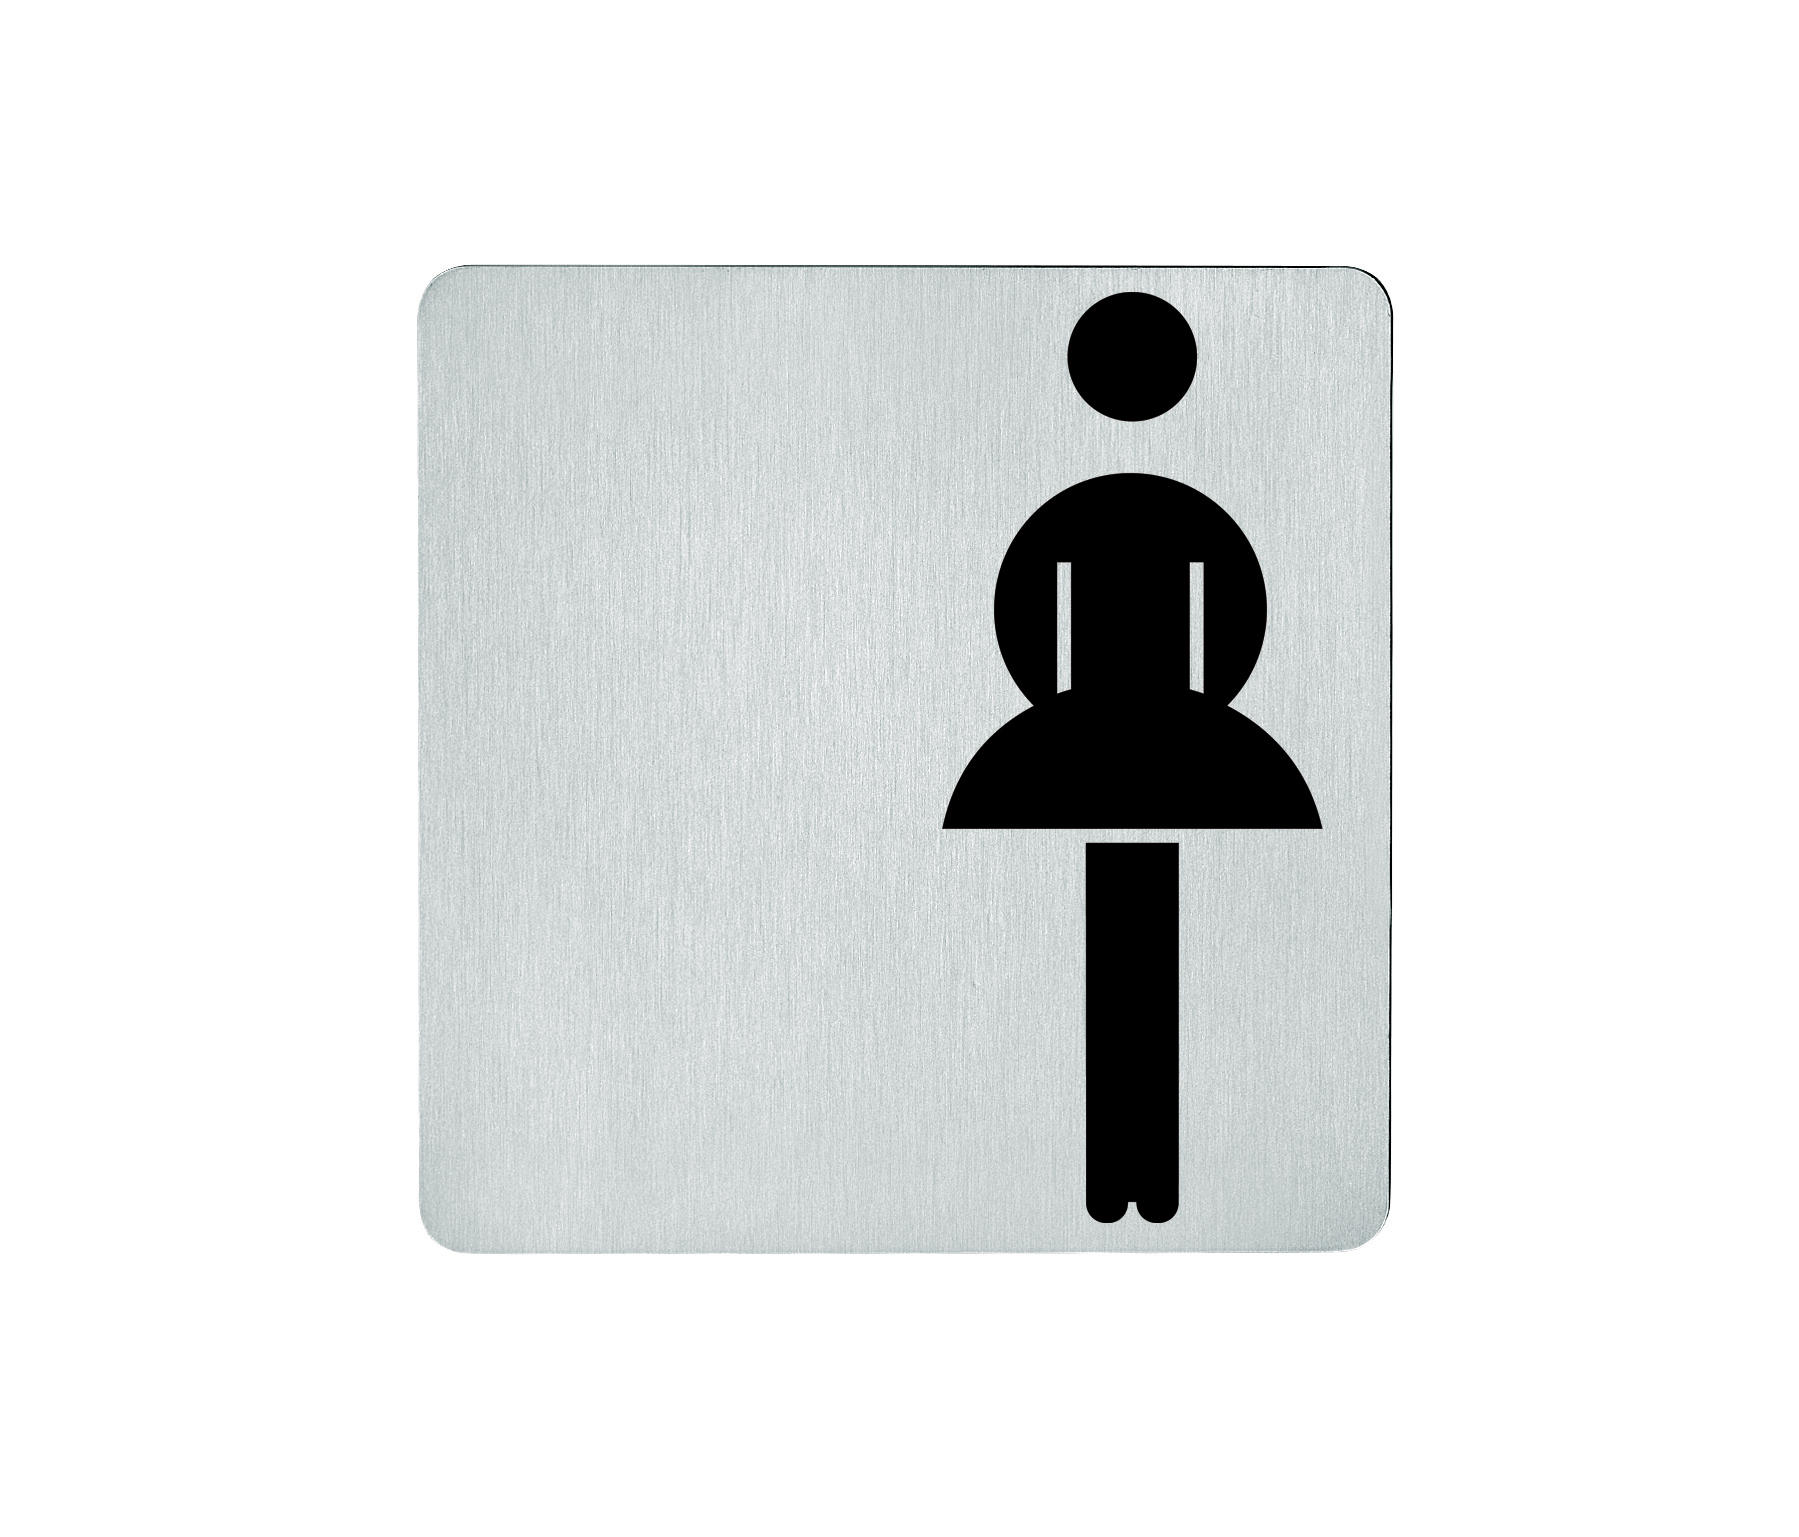 Toilet signs - find the best of design online | Architonic